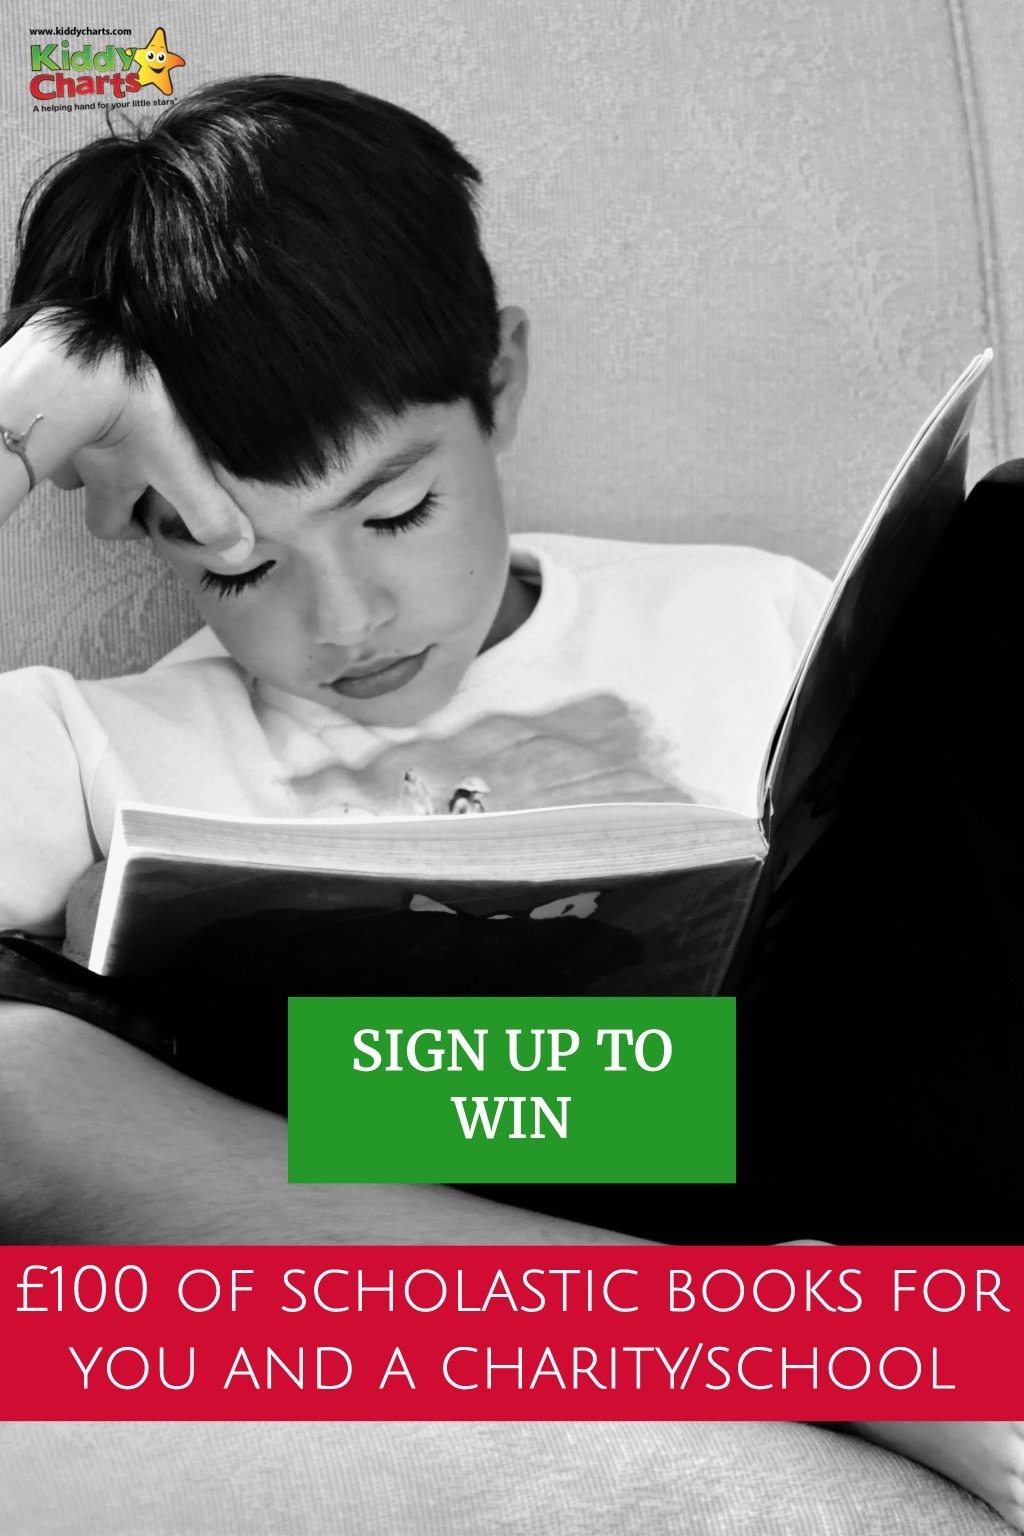 Sign up to KiddyCharts newsltter for your chance to win £100 of Scholastic Books for yourself and your school/charity